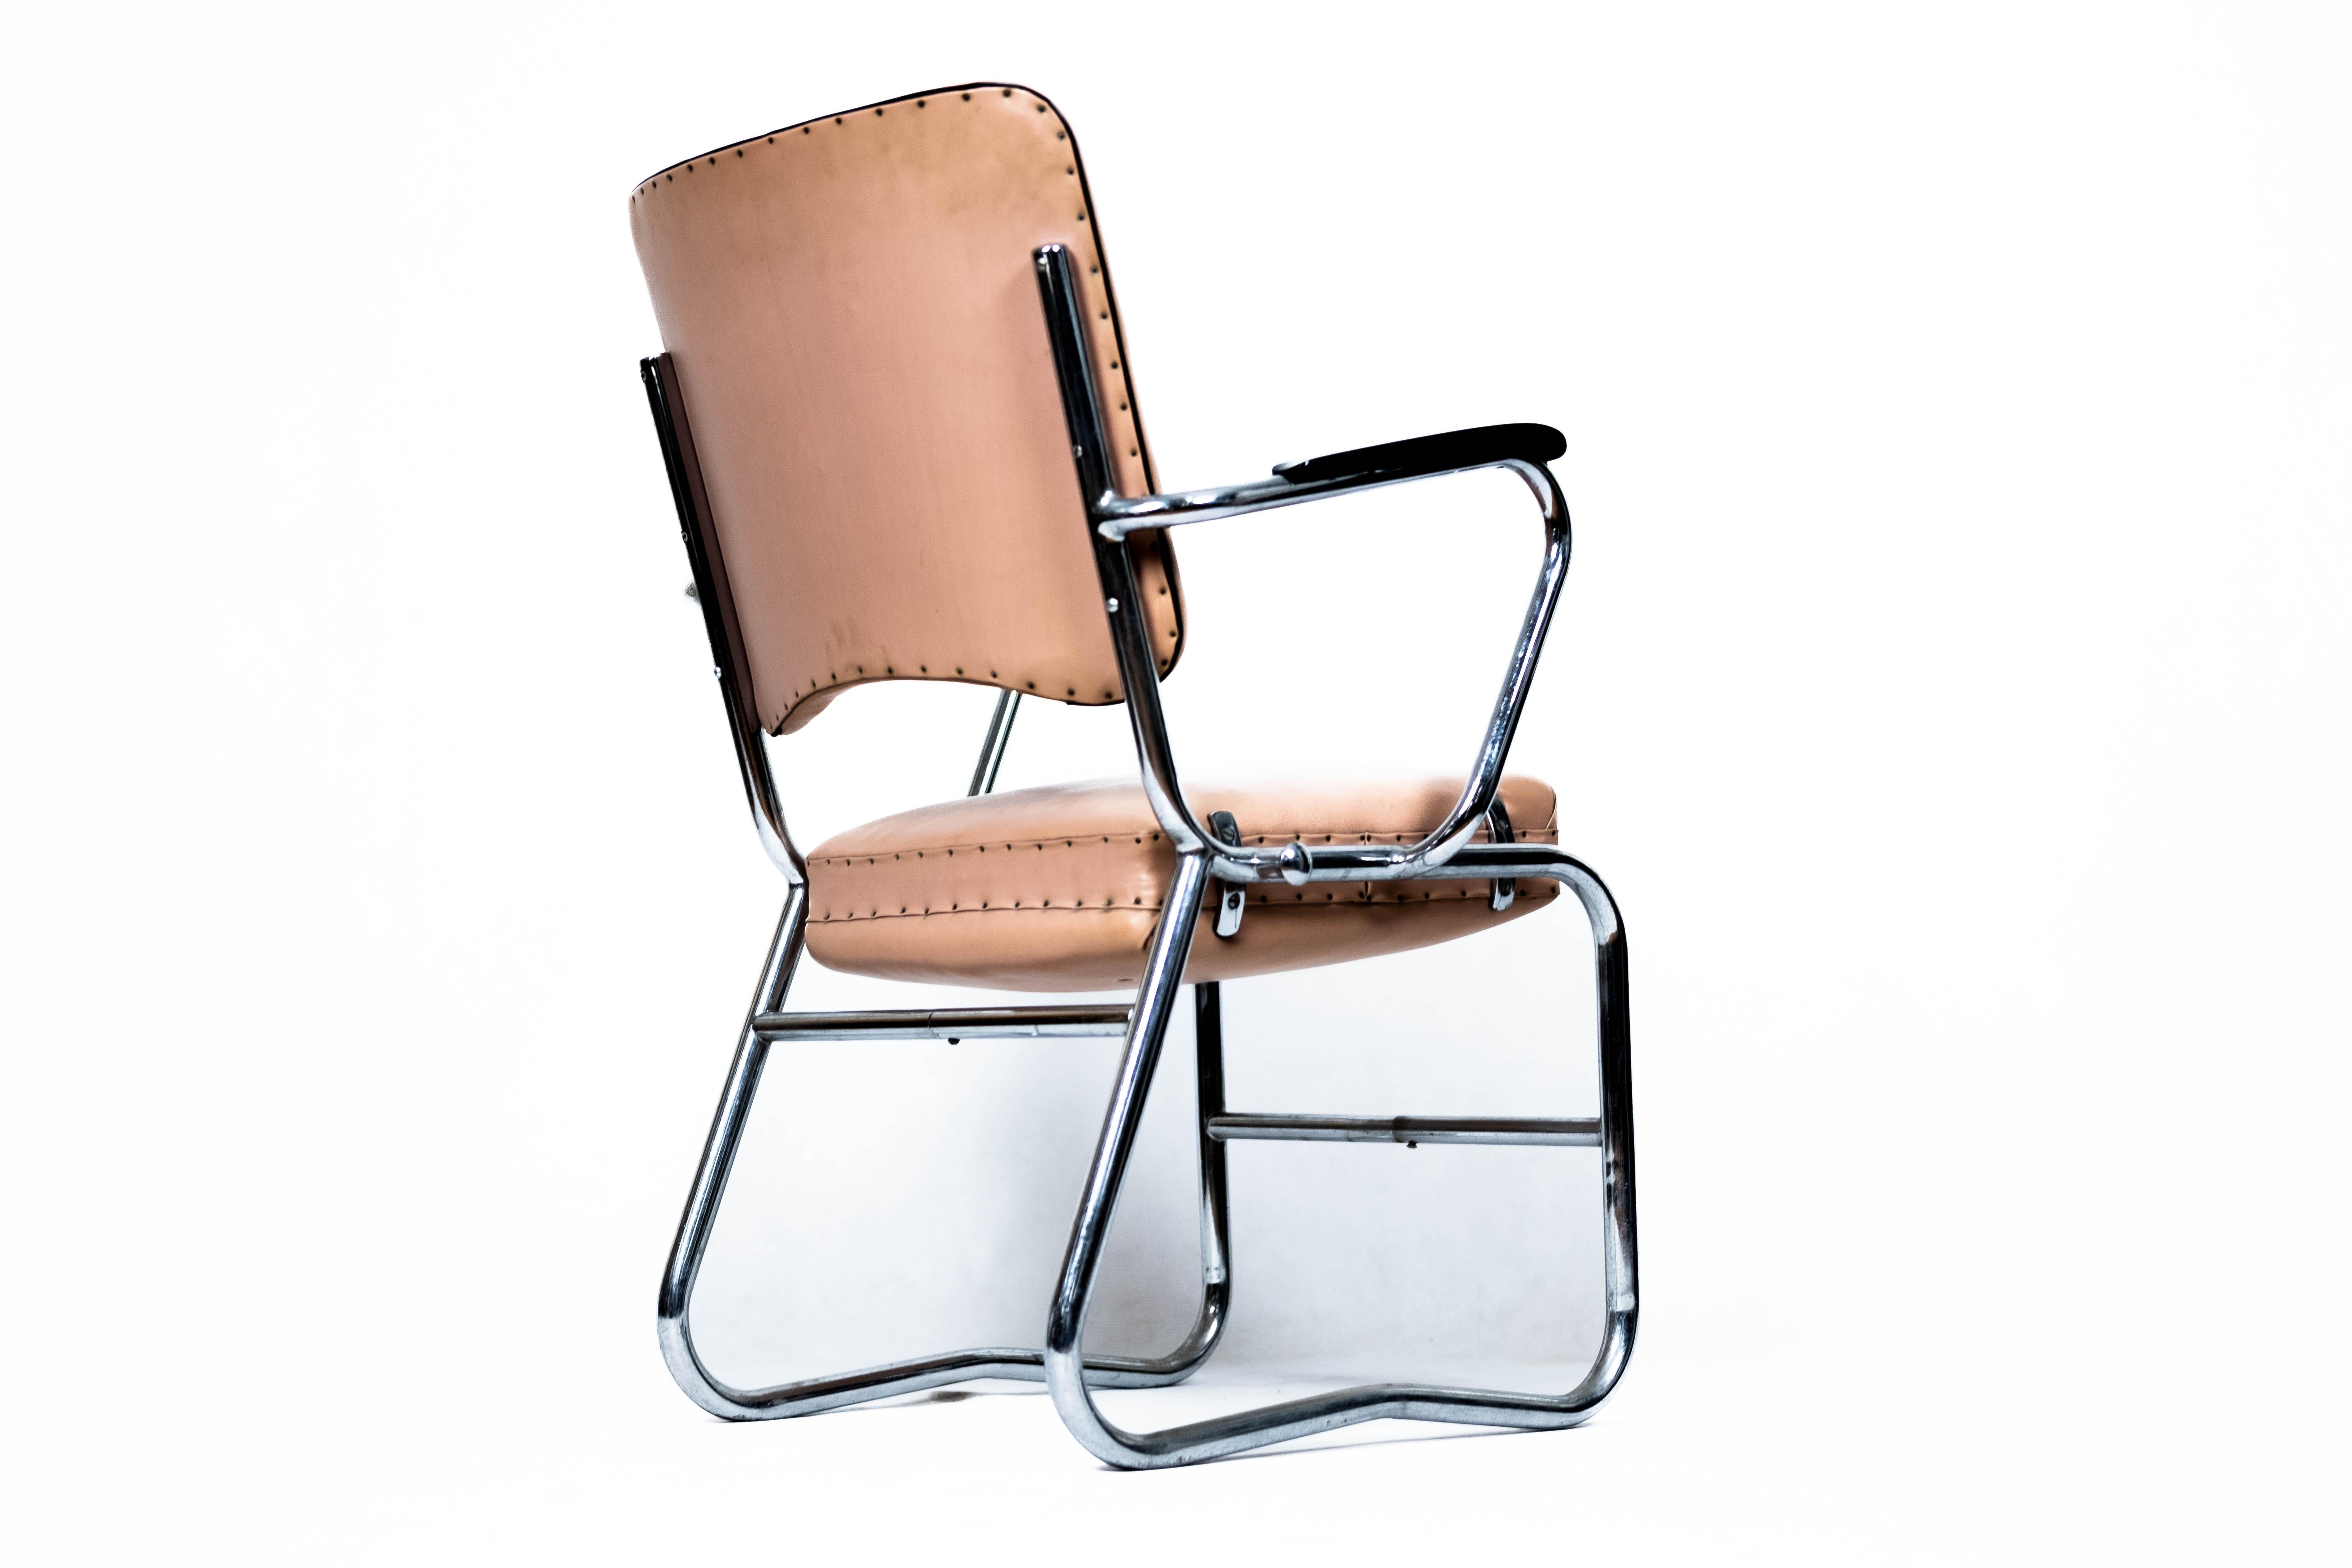 2 x Pink Midcentury Steelpipe-Armchair with rotatable seat (Netherlands, 1945) For Sale 3